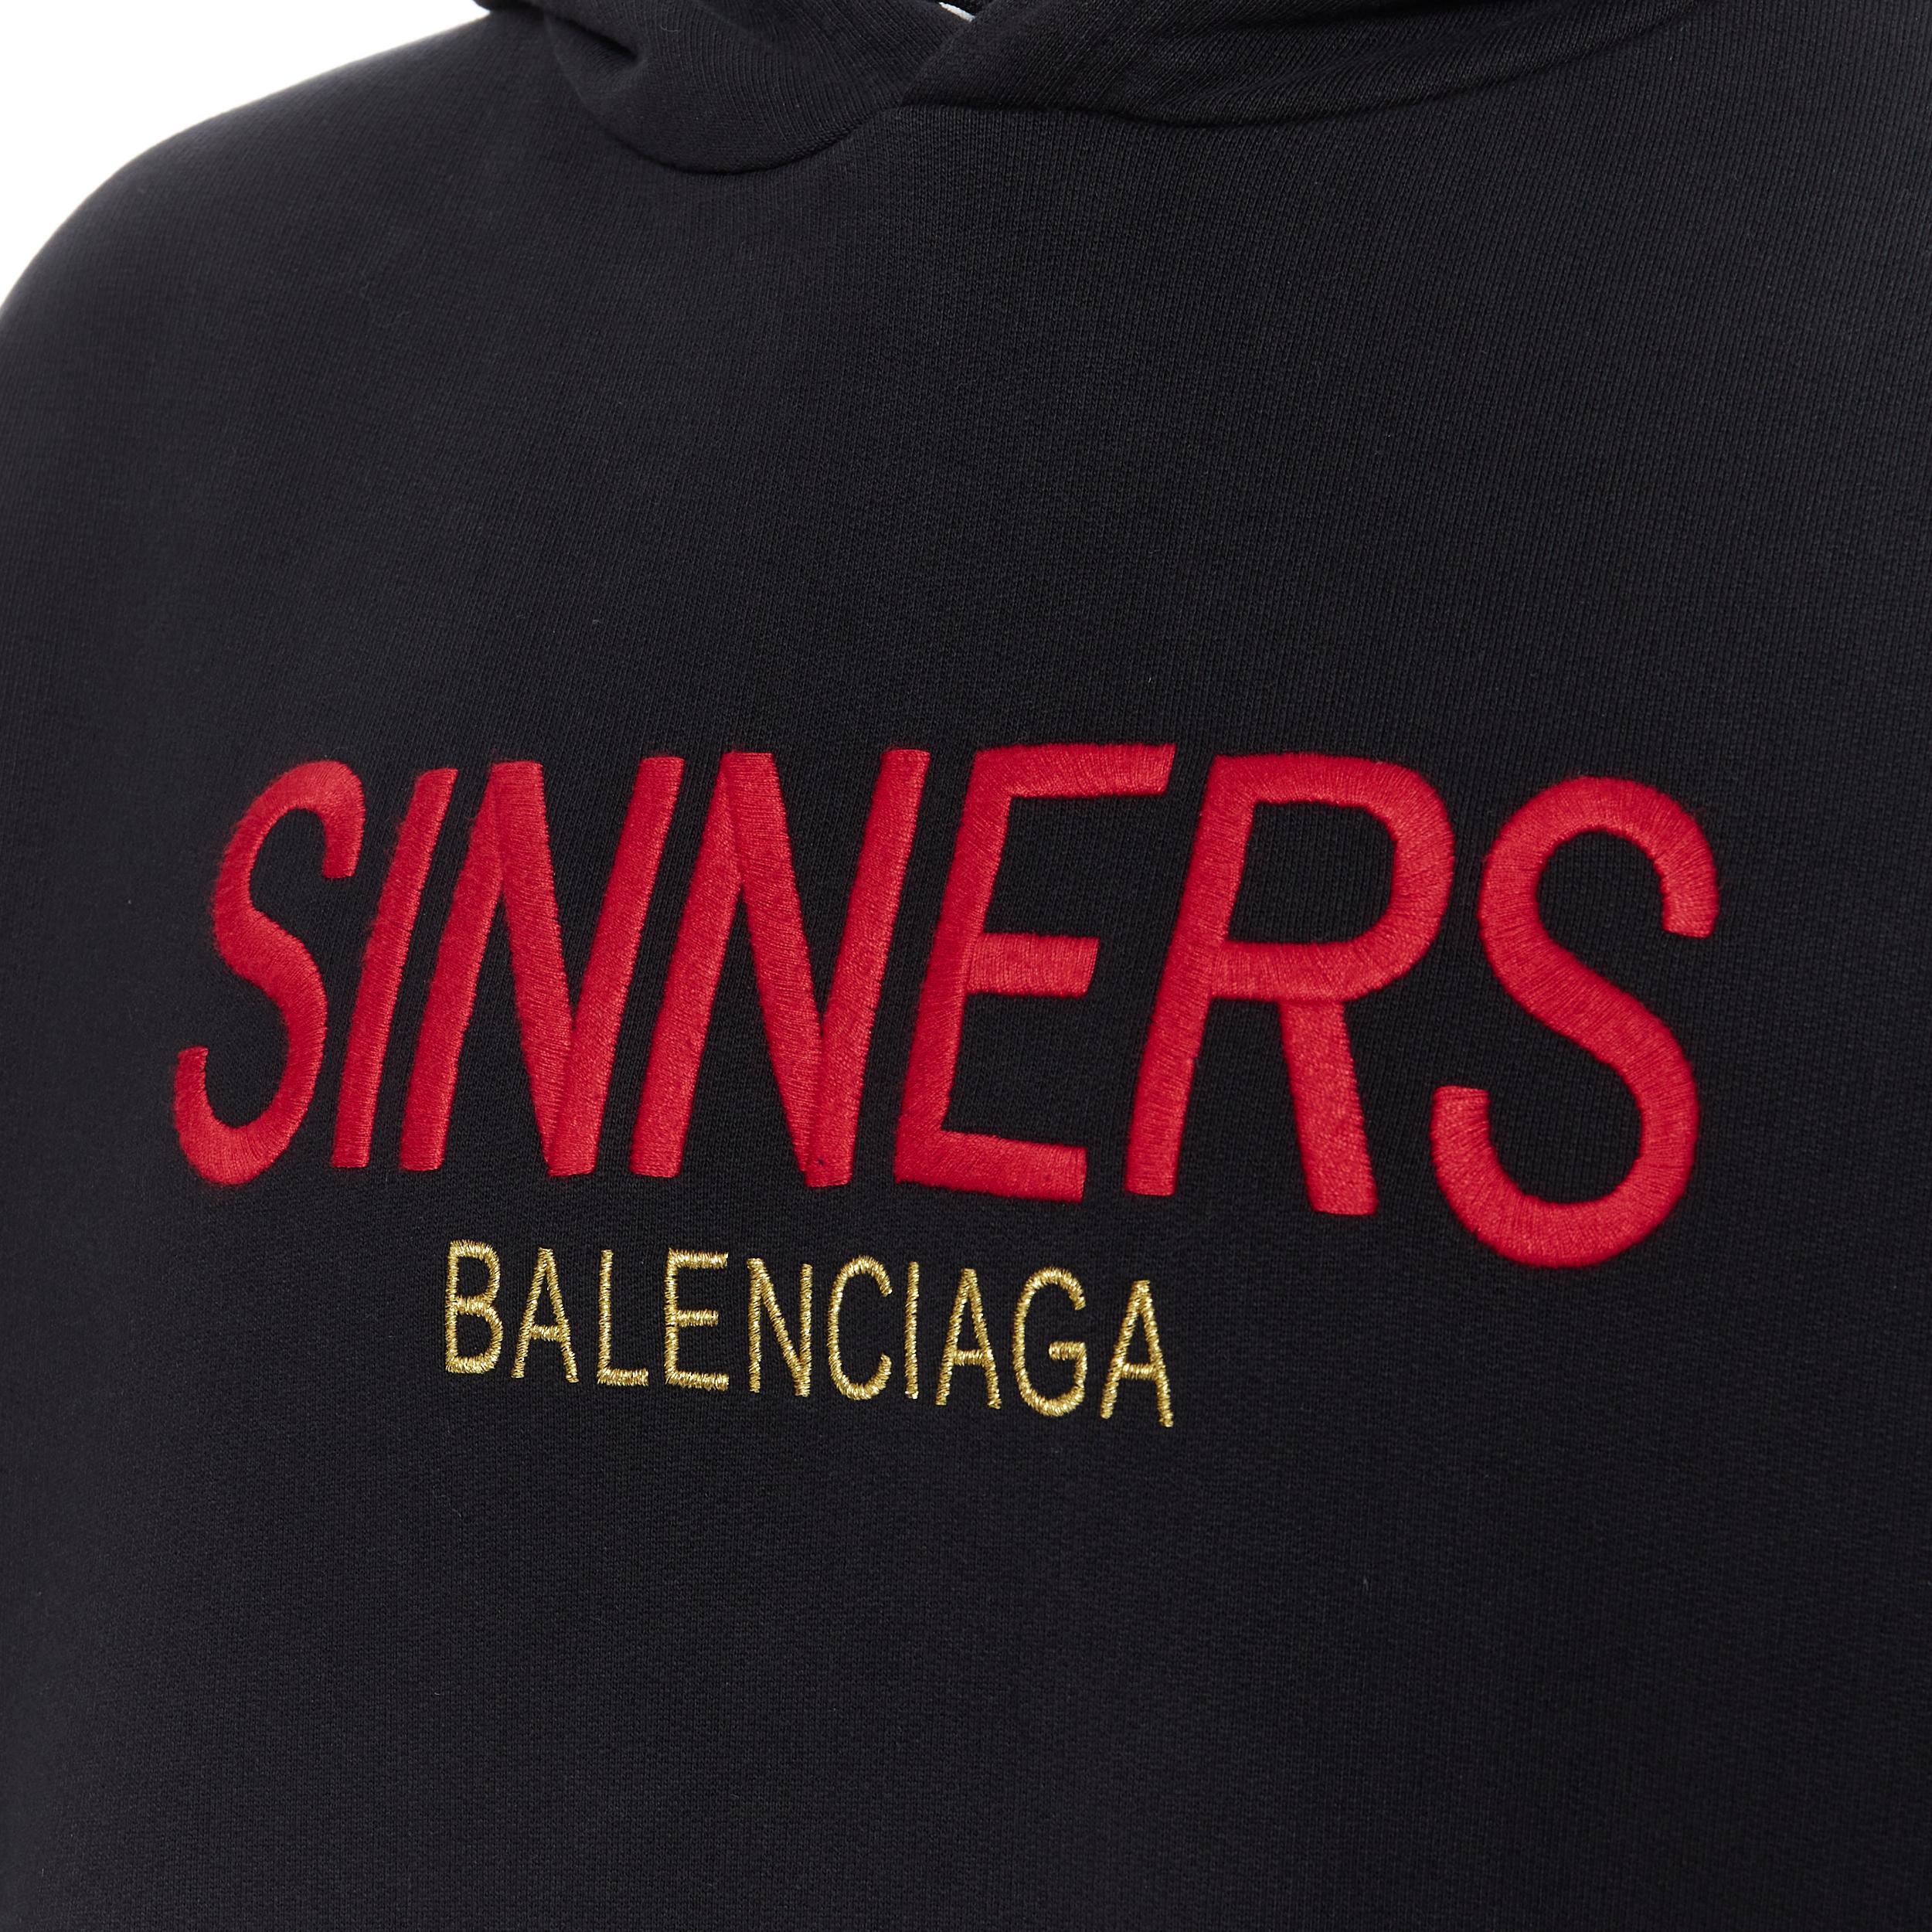 new BALENCIAGA DEMNA 2018 Sinners logo embroidery black cotton hoodie pullover L 
Reference: TGAS/B00186 
Brand: Balenciaga 
Designer: Demna Gvasalia 
Collection: 2018 
Material: Cotton 
Color: Black 
Pattern: Solid 
Made in: Italy 

CONDITION: